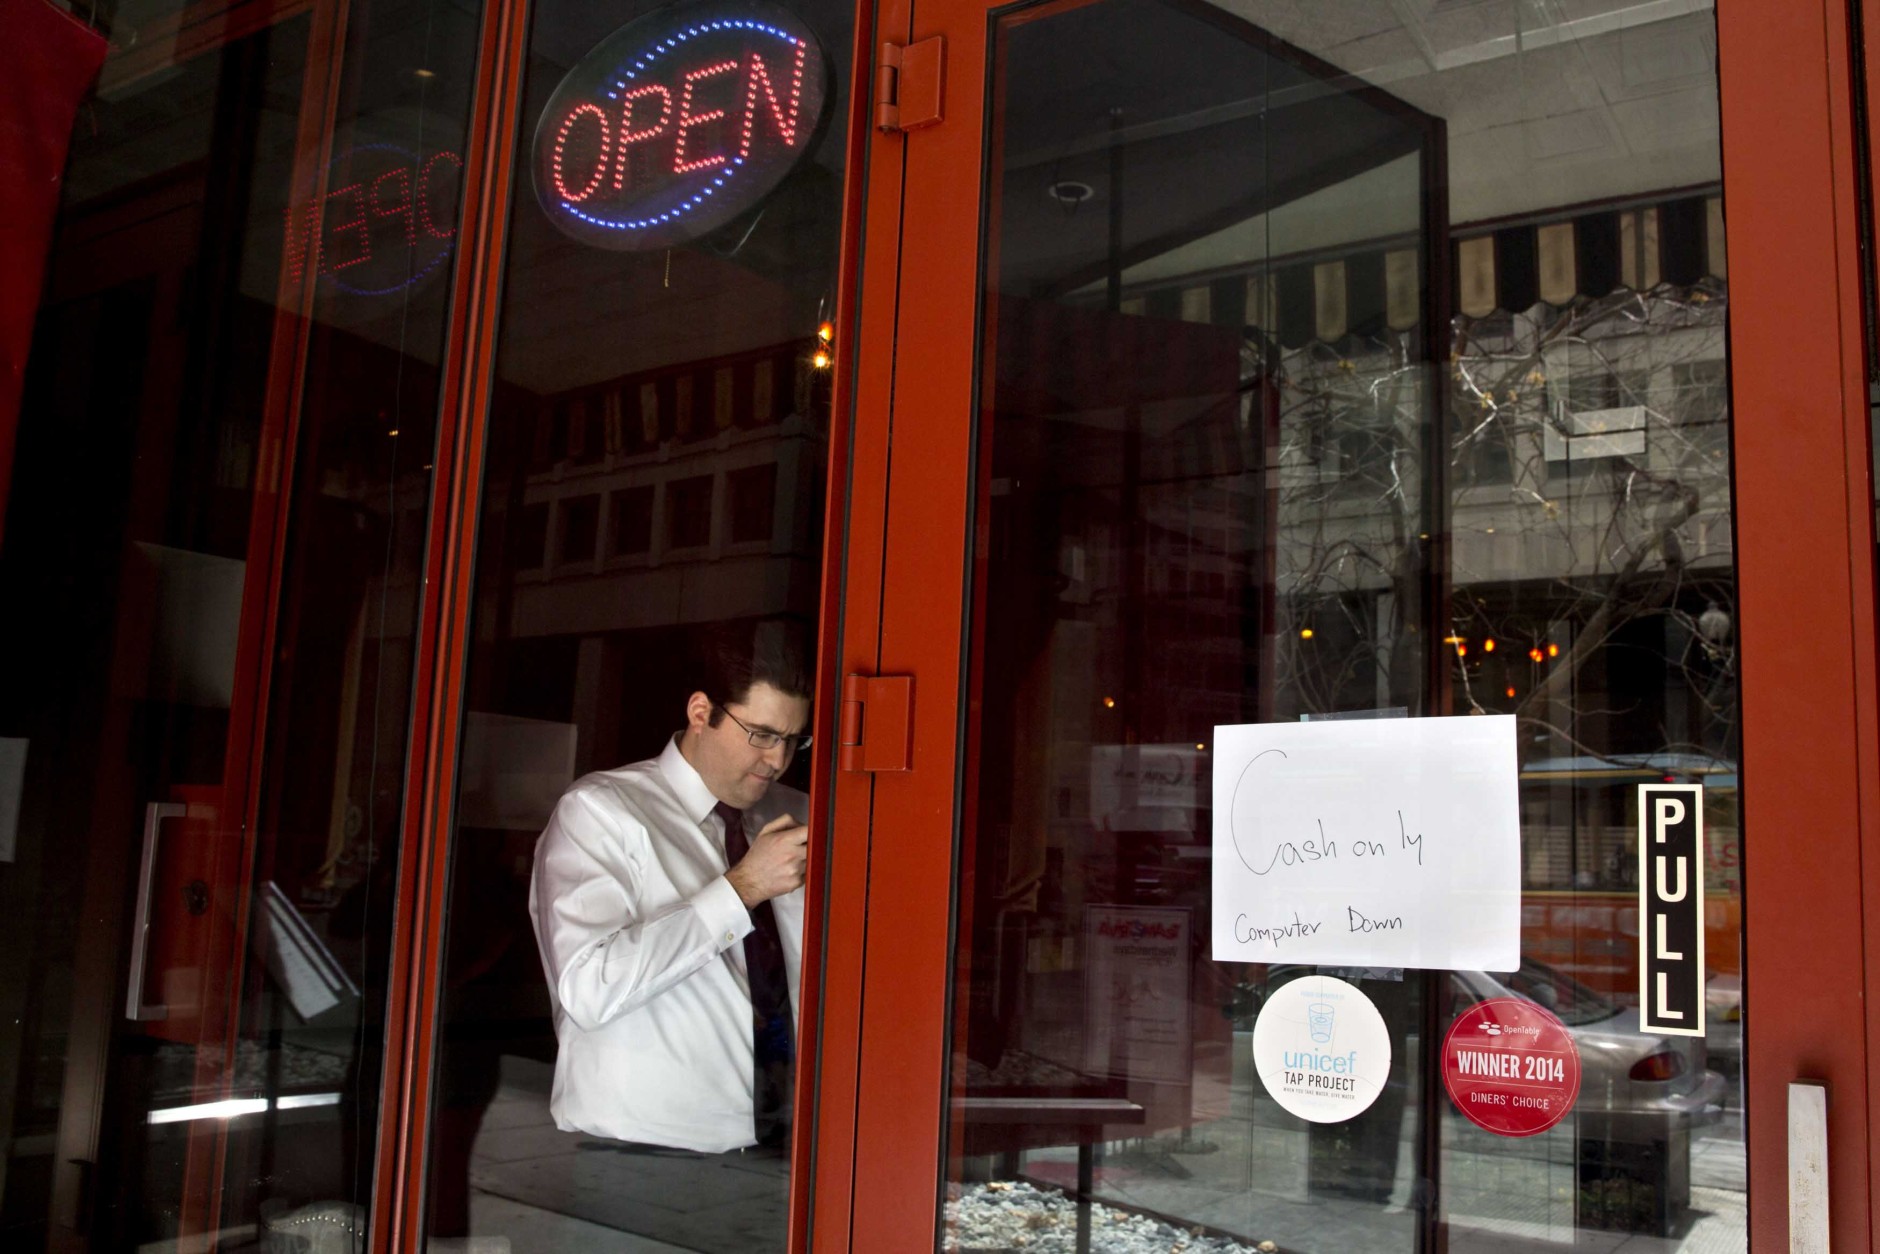 A man checks his cellphone in a restaurant with a sign advertising that the computer is down, as power returns after a brief power outage, Tuesday, April 7, 2015, in Washington. The White House, State Department, and Capitol were all affected by reports of widespread power outages across Washington and its suburbs Tuesday afternoon.  (AP Photo/Jacquelyn Martin)